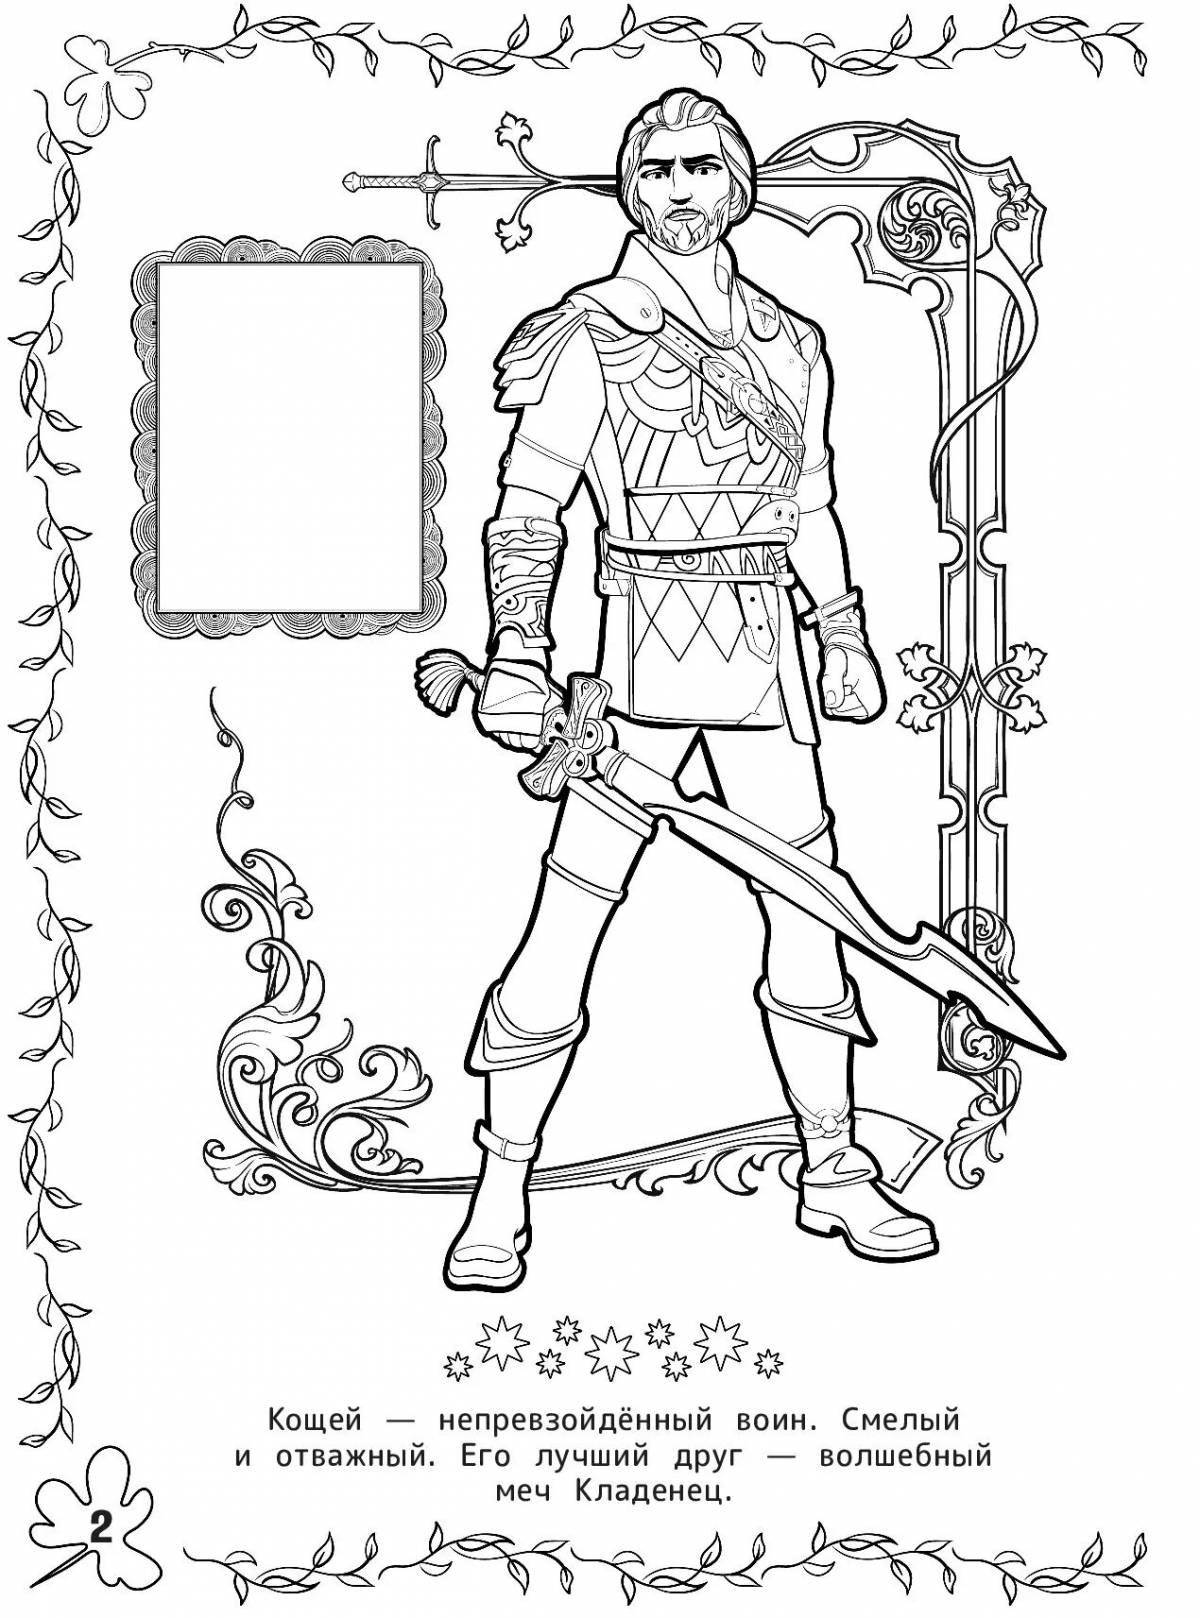 Coloring page charming koshchei the immortal